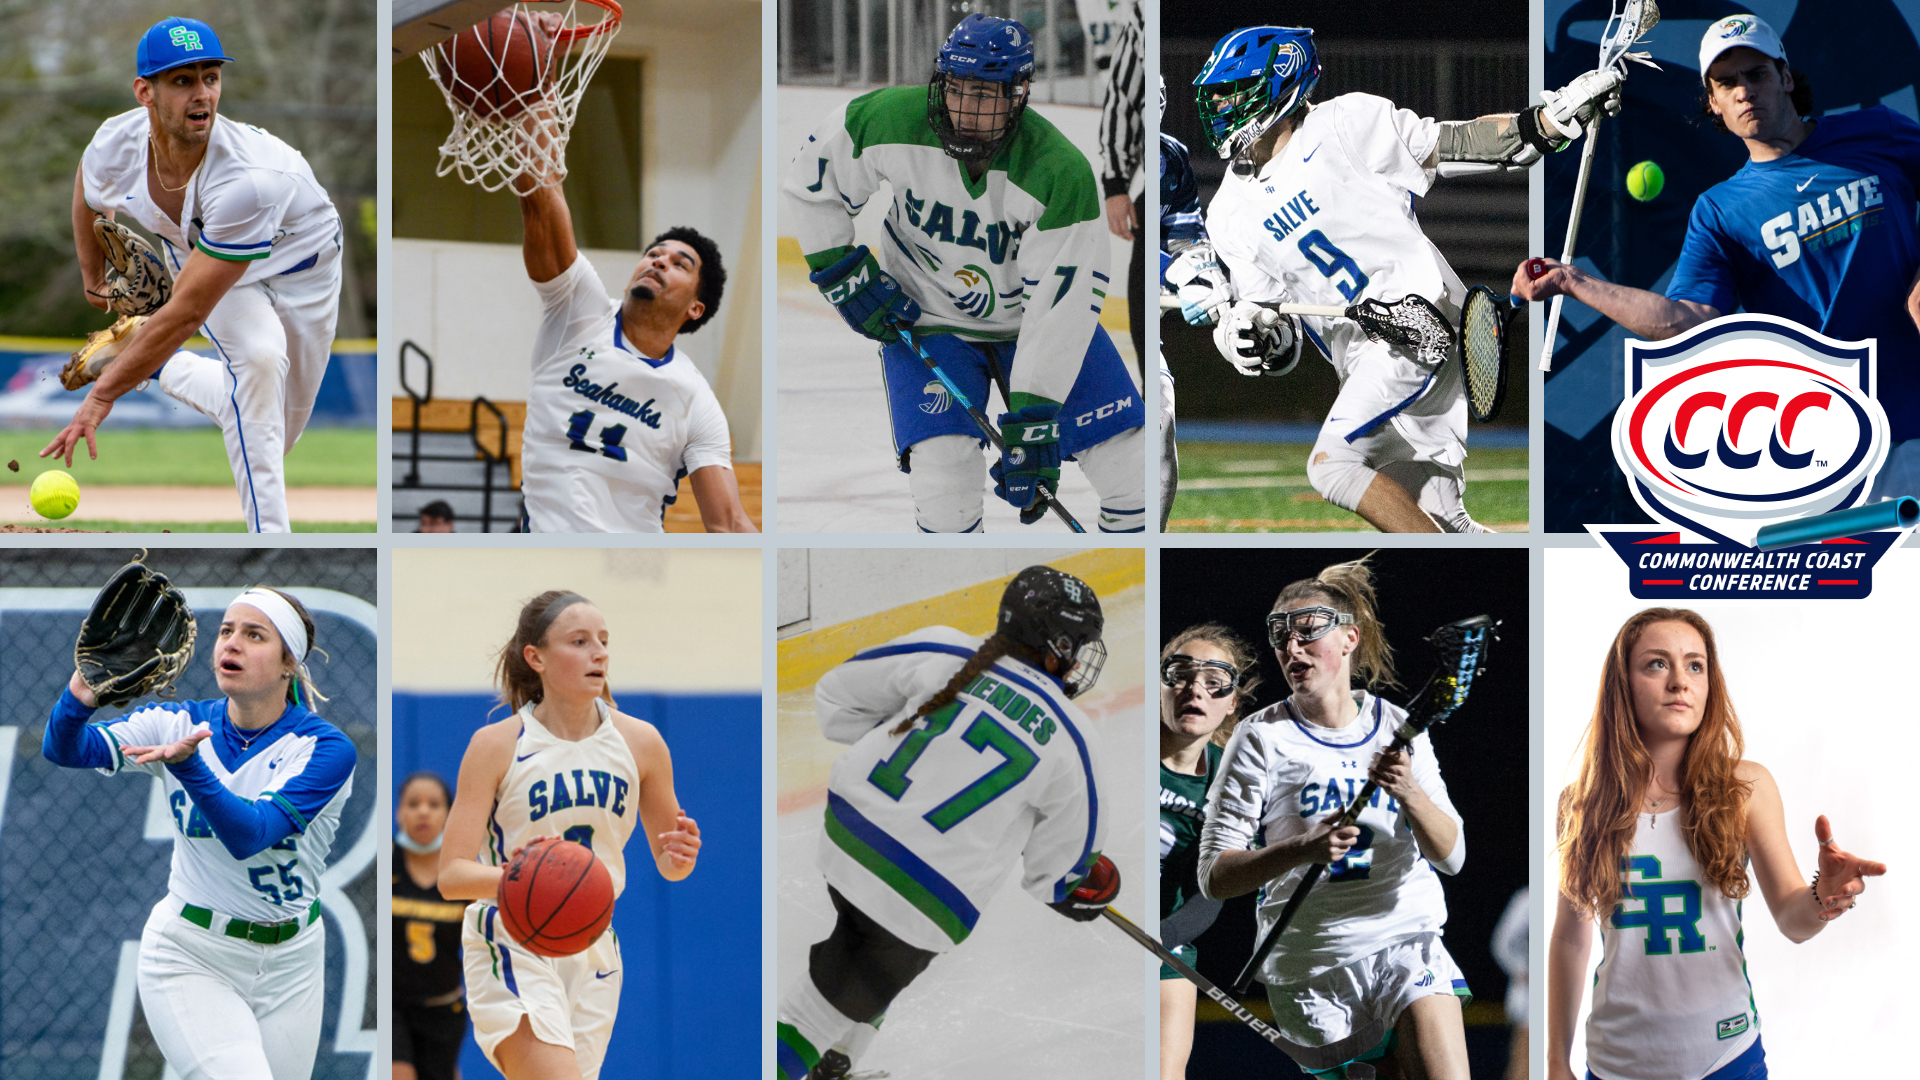 Seahawks on the Spring Academic All-Conference Team representing 10 sports (clockwise starting top left) - Dominic Perachi (baseball), Cameron Collins (basketball), Spencer Stanley (ice hockey), Pat Leary (lacrosse), Samuel Johnson (tennis), Mary Kate Scalzulli (track and field), Nicole Smith (lacrosse), Brynn Mendes (ice hockey), Morgan Shuey (basketball), Francesca Rubino (softball).